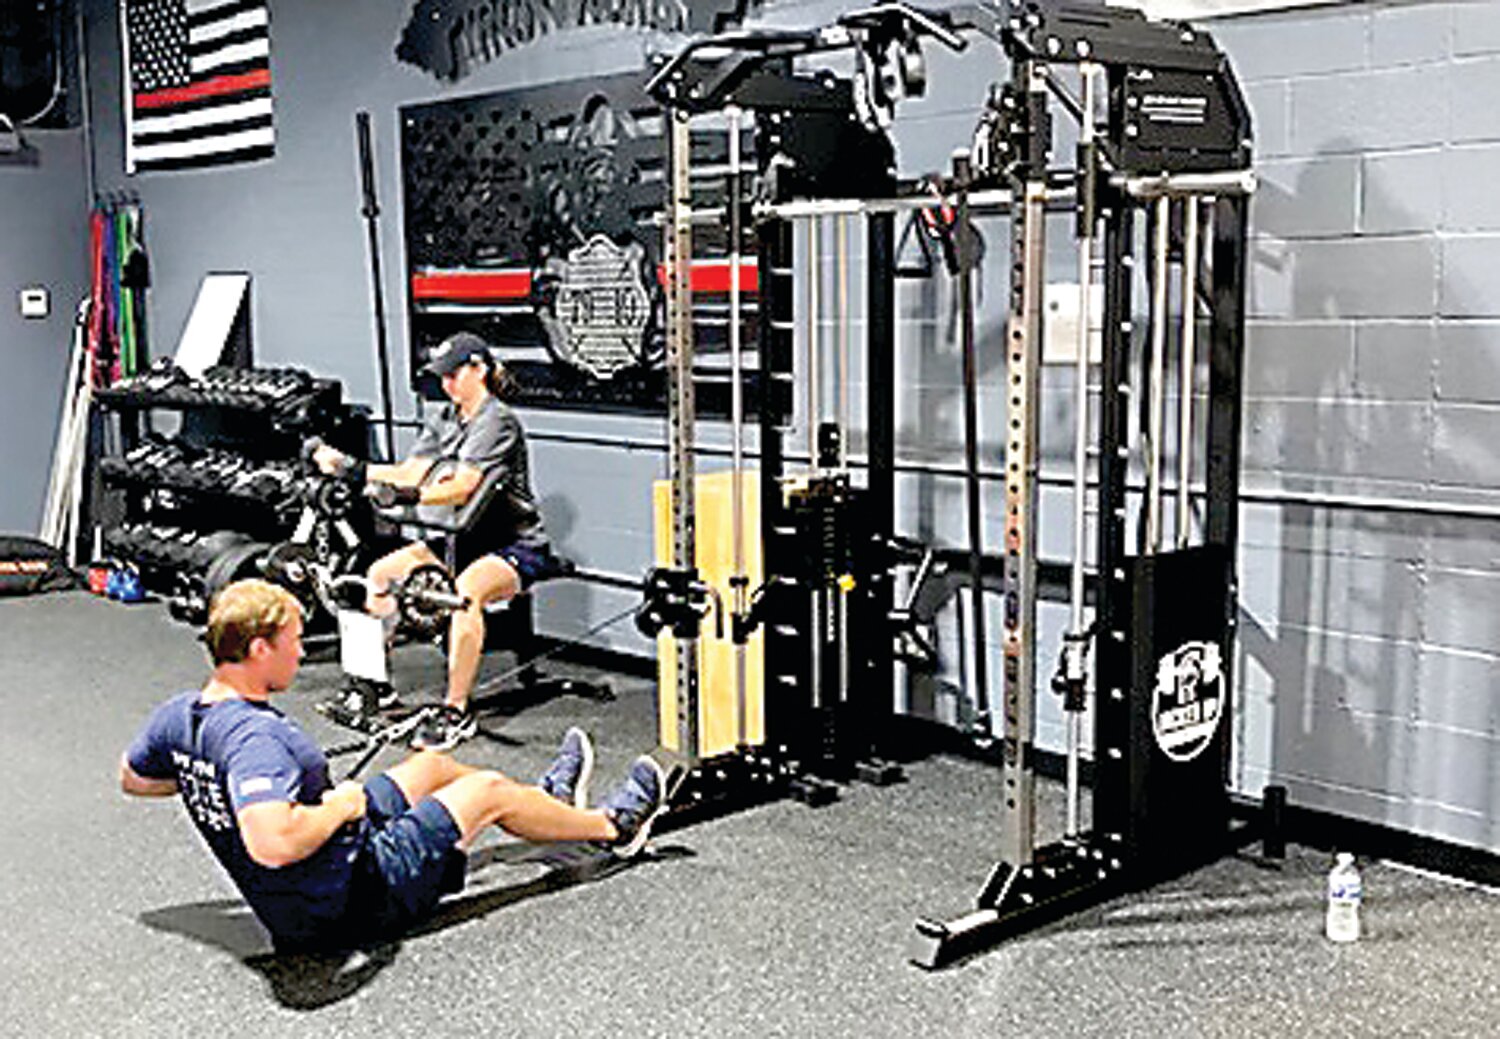 Doylestown Fire Company No. 1 volunteer firefighters workout in their new fitness center at Substation 79 in Doylestown Township.